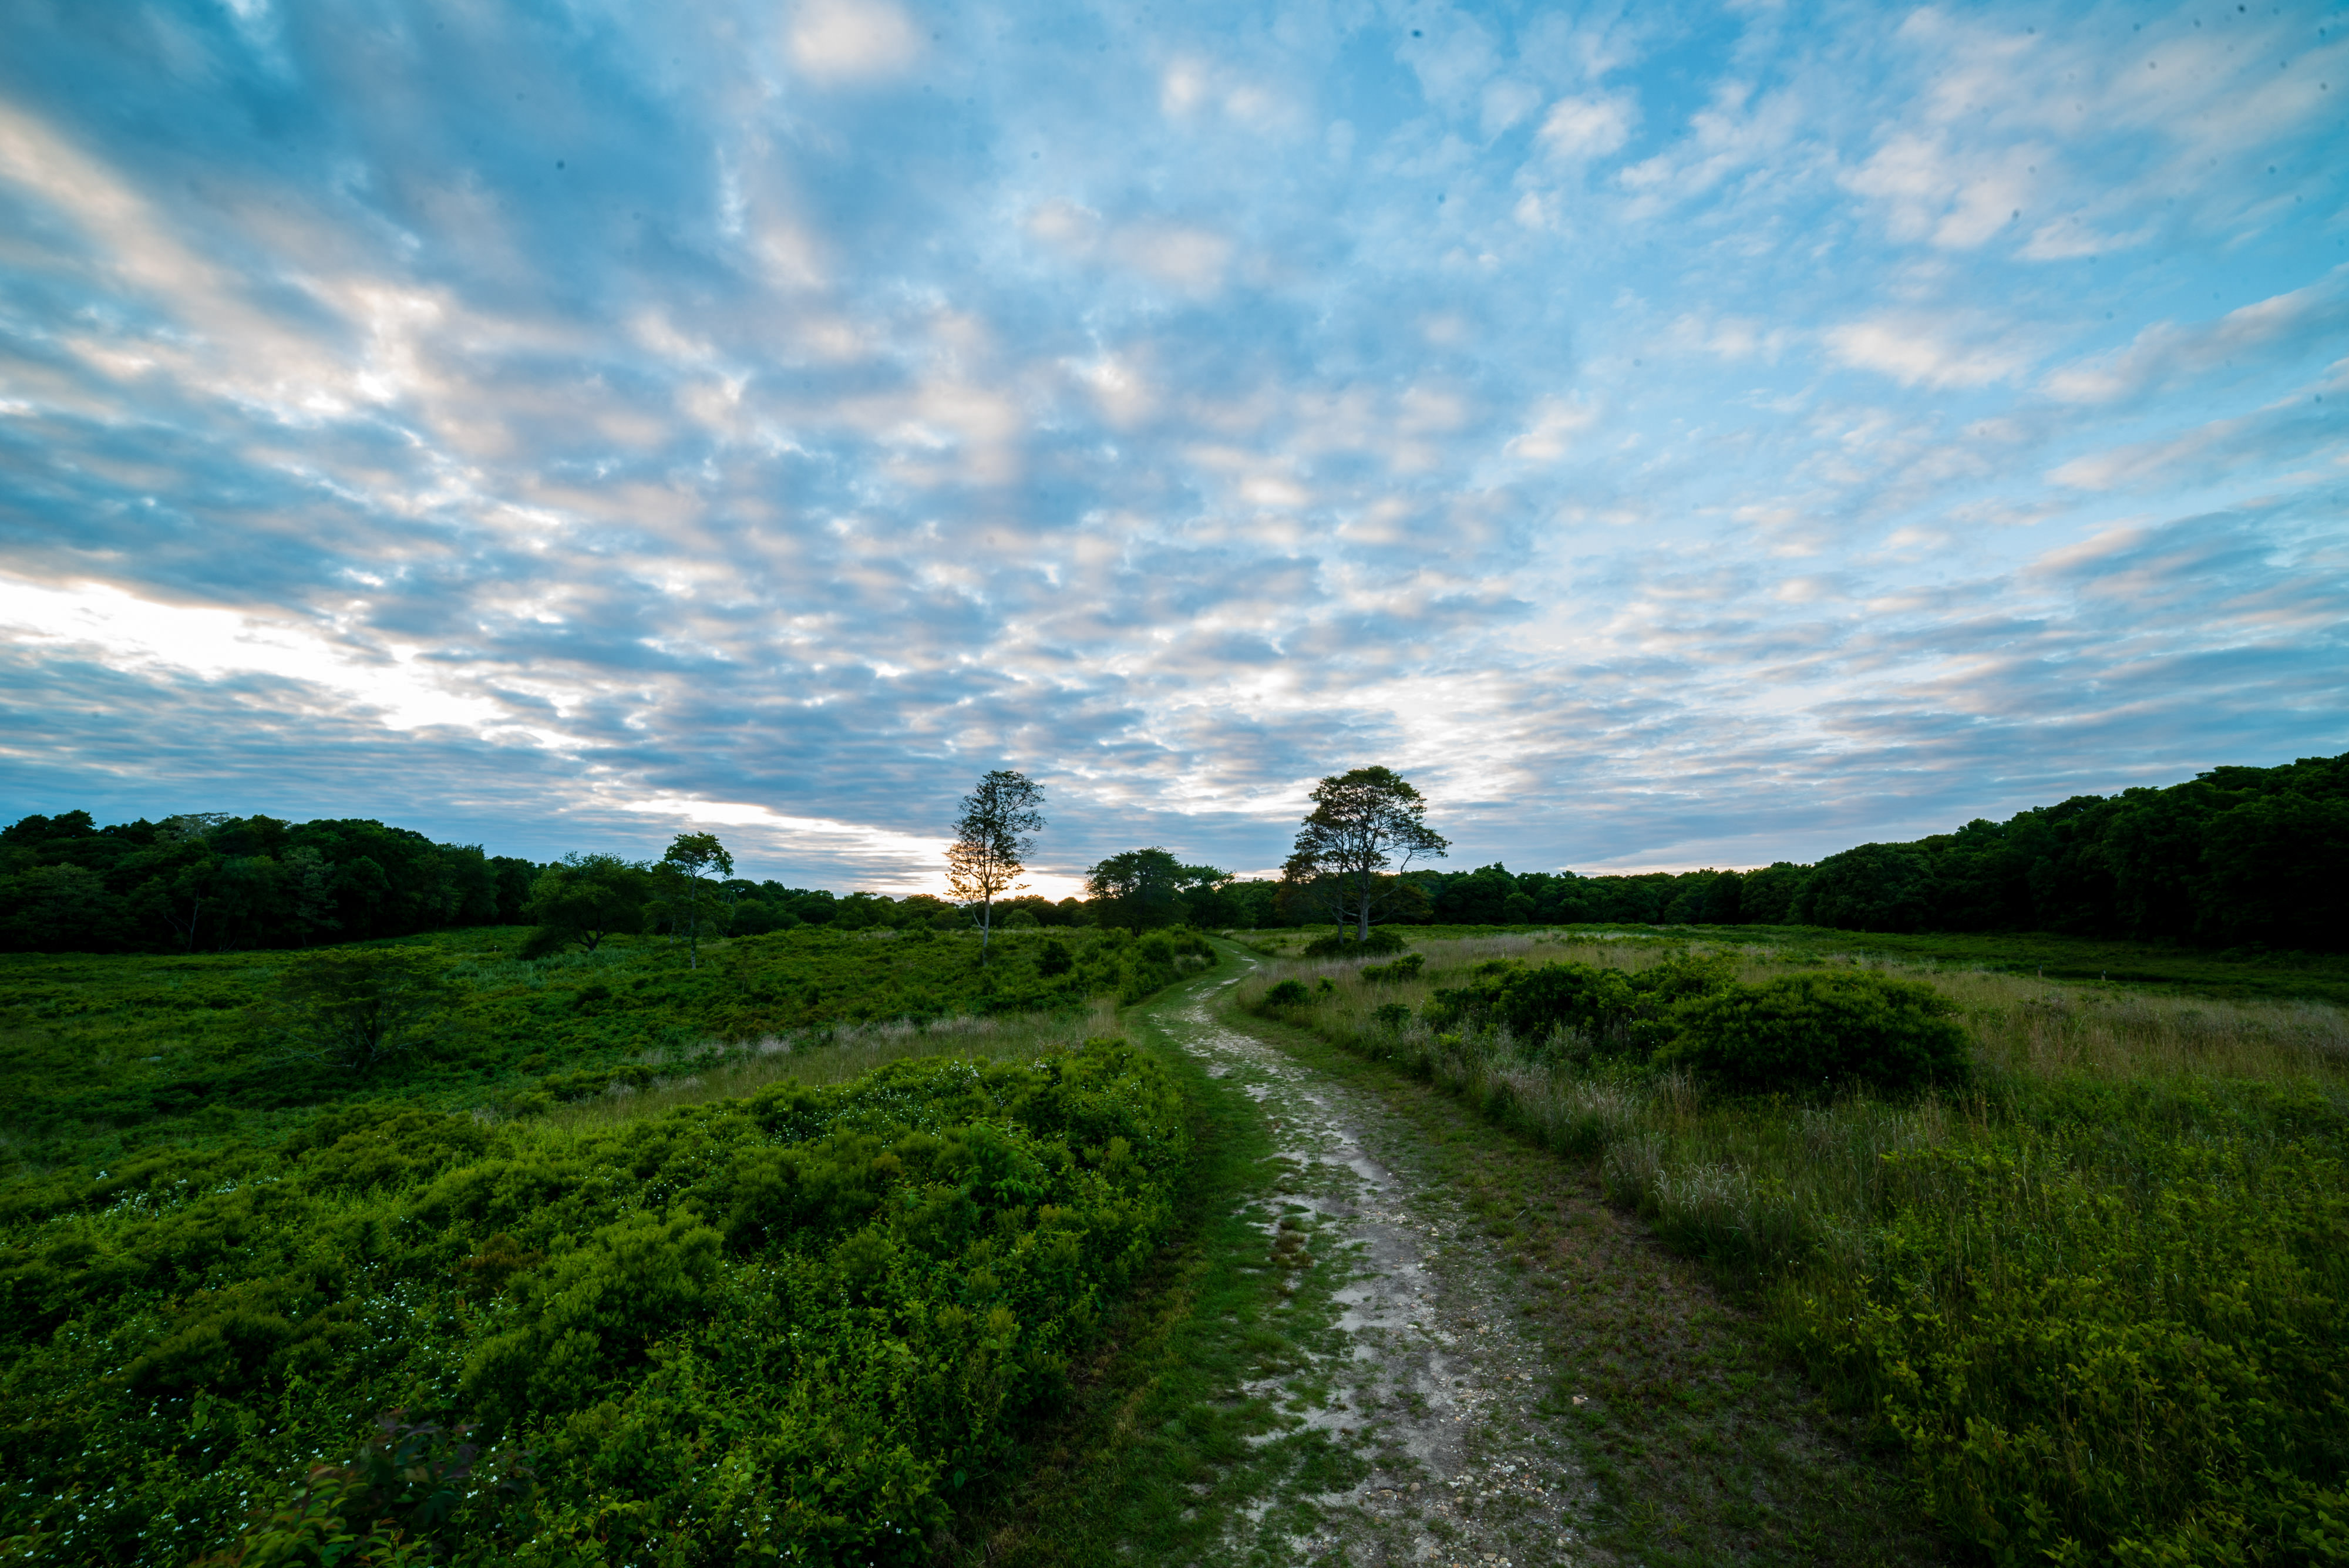 A winding trail through a green field leads to a valley of trees. Blue sky with dotted clouds is in the background.